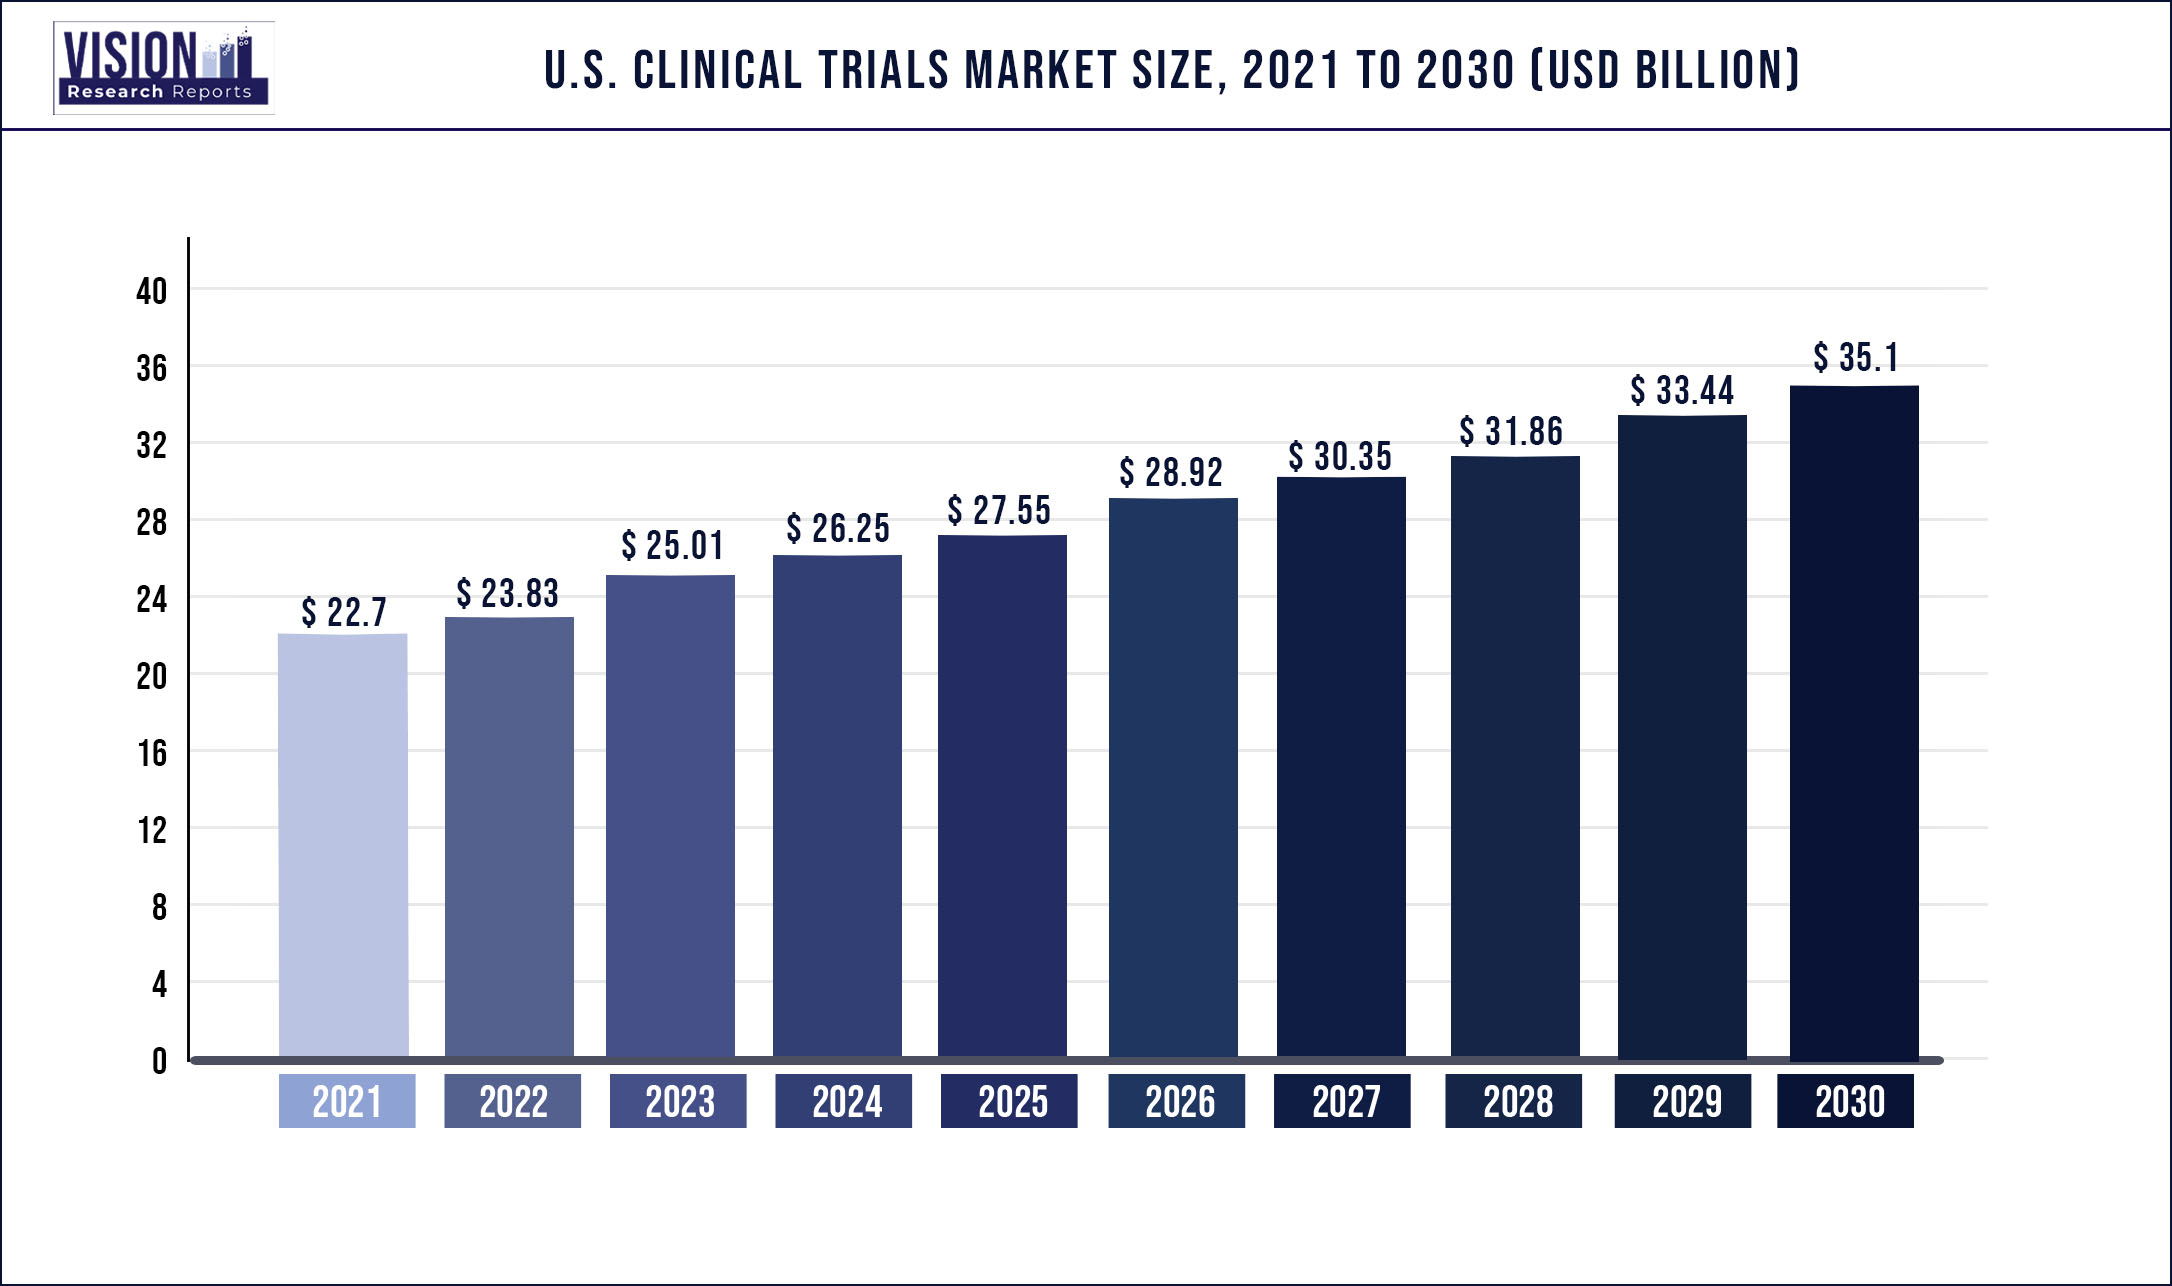 U.S. Clinical Trials Market Size 2021 to 2030